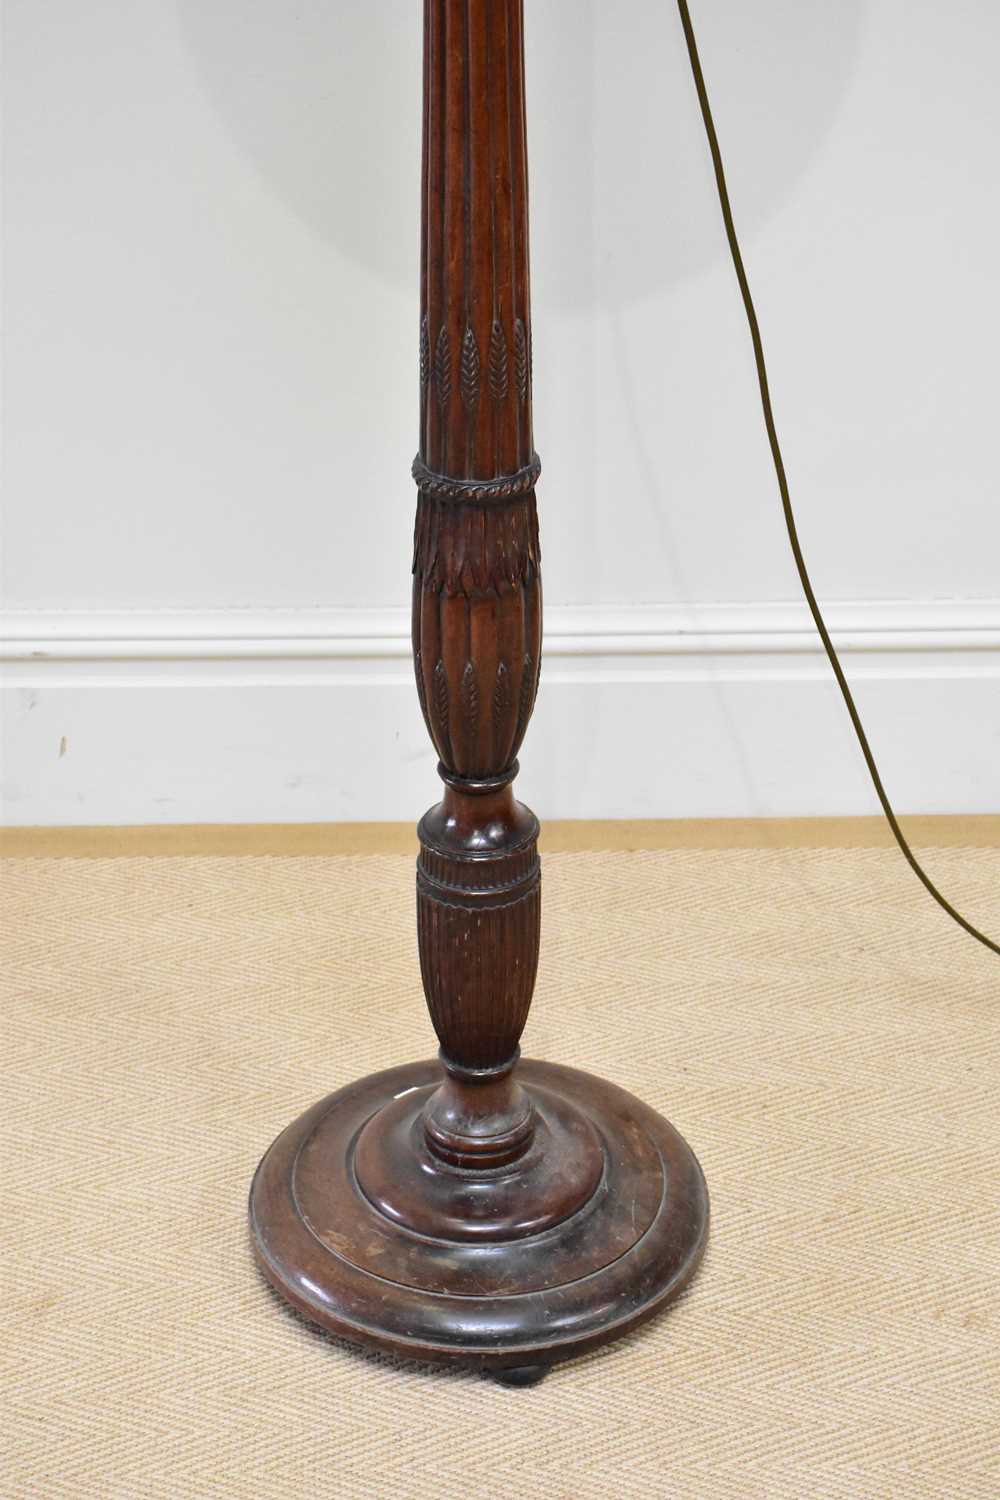 An early 20th century carved standard lamp with floral and fluted decoration, height 144cm. - Image 2 of 2